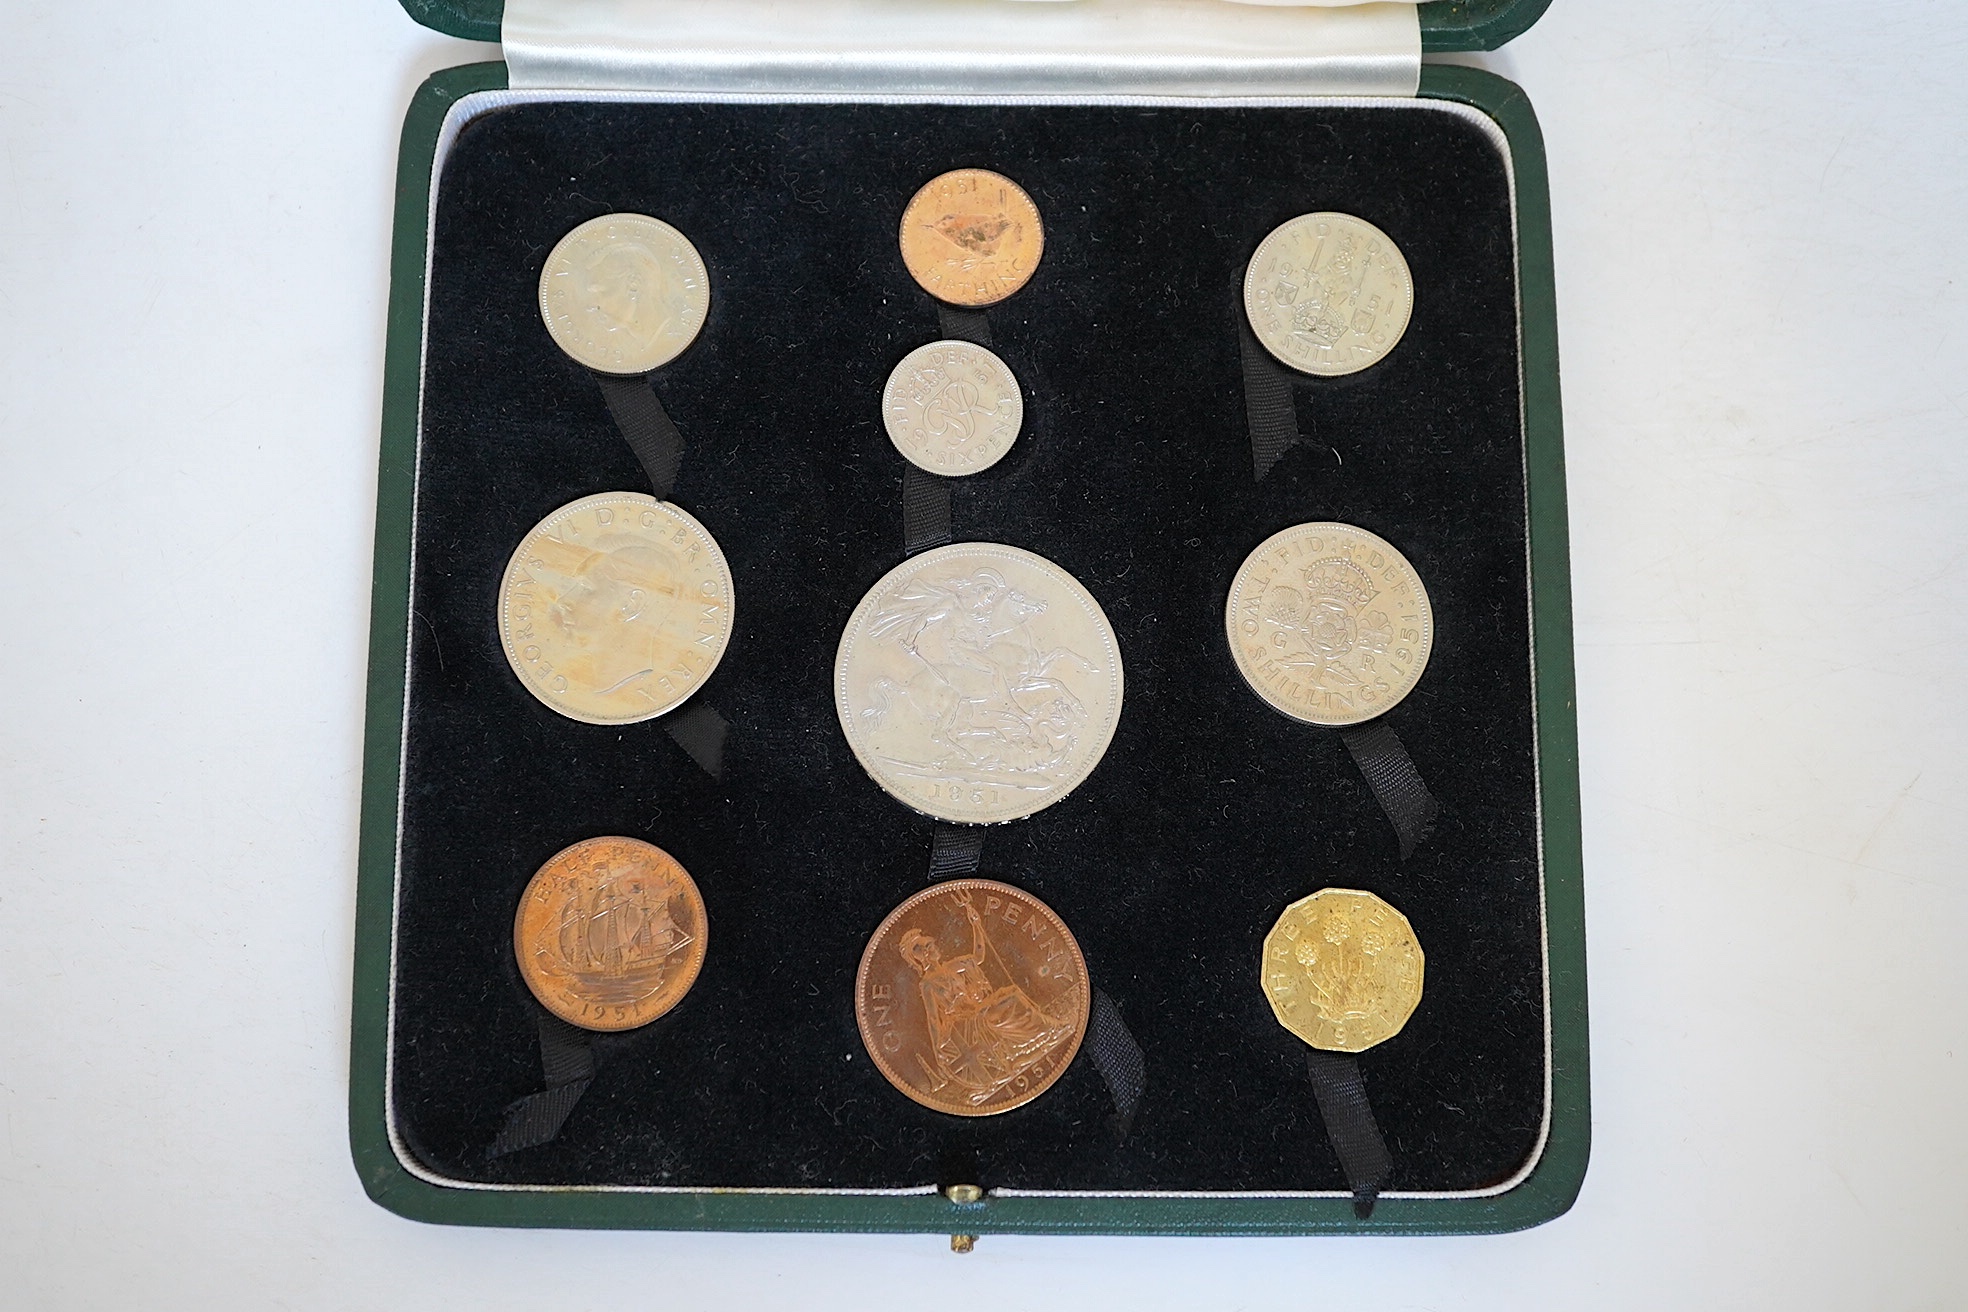 British proof coins, 1951 George VI Festival of Britain proof 10 coin set, crown to farthing, in deluxe case of issue, together with a Festival of Britain program and various promotional photographs